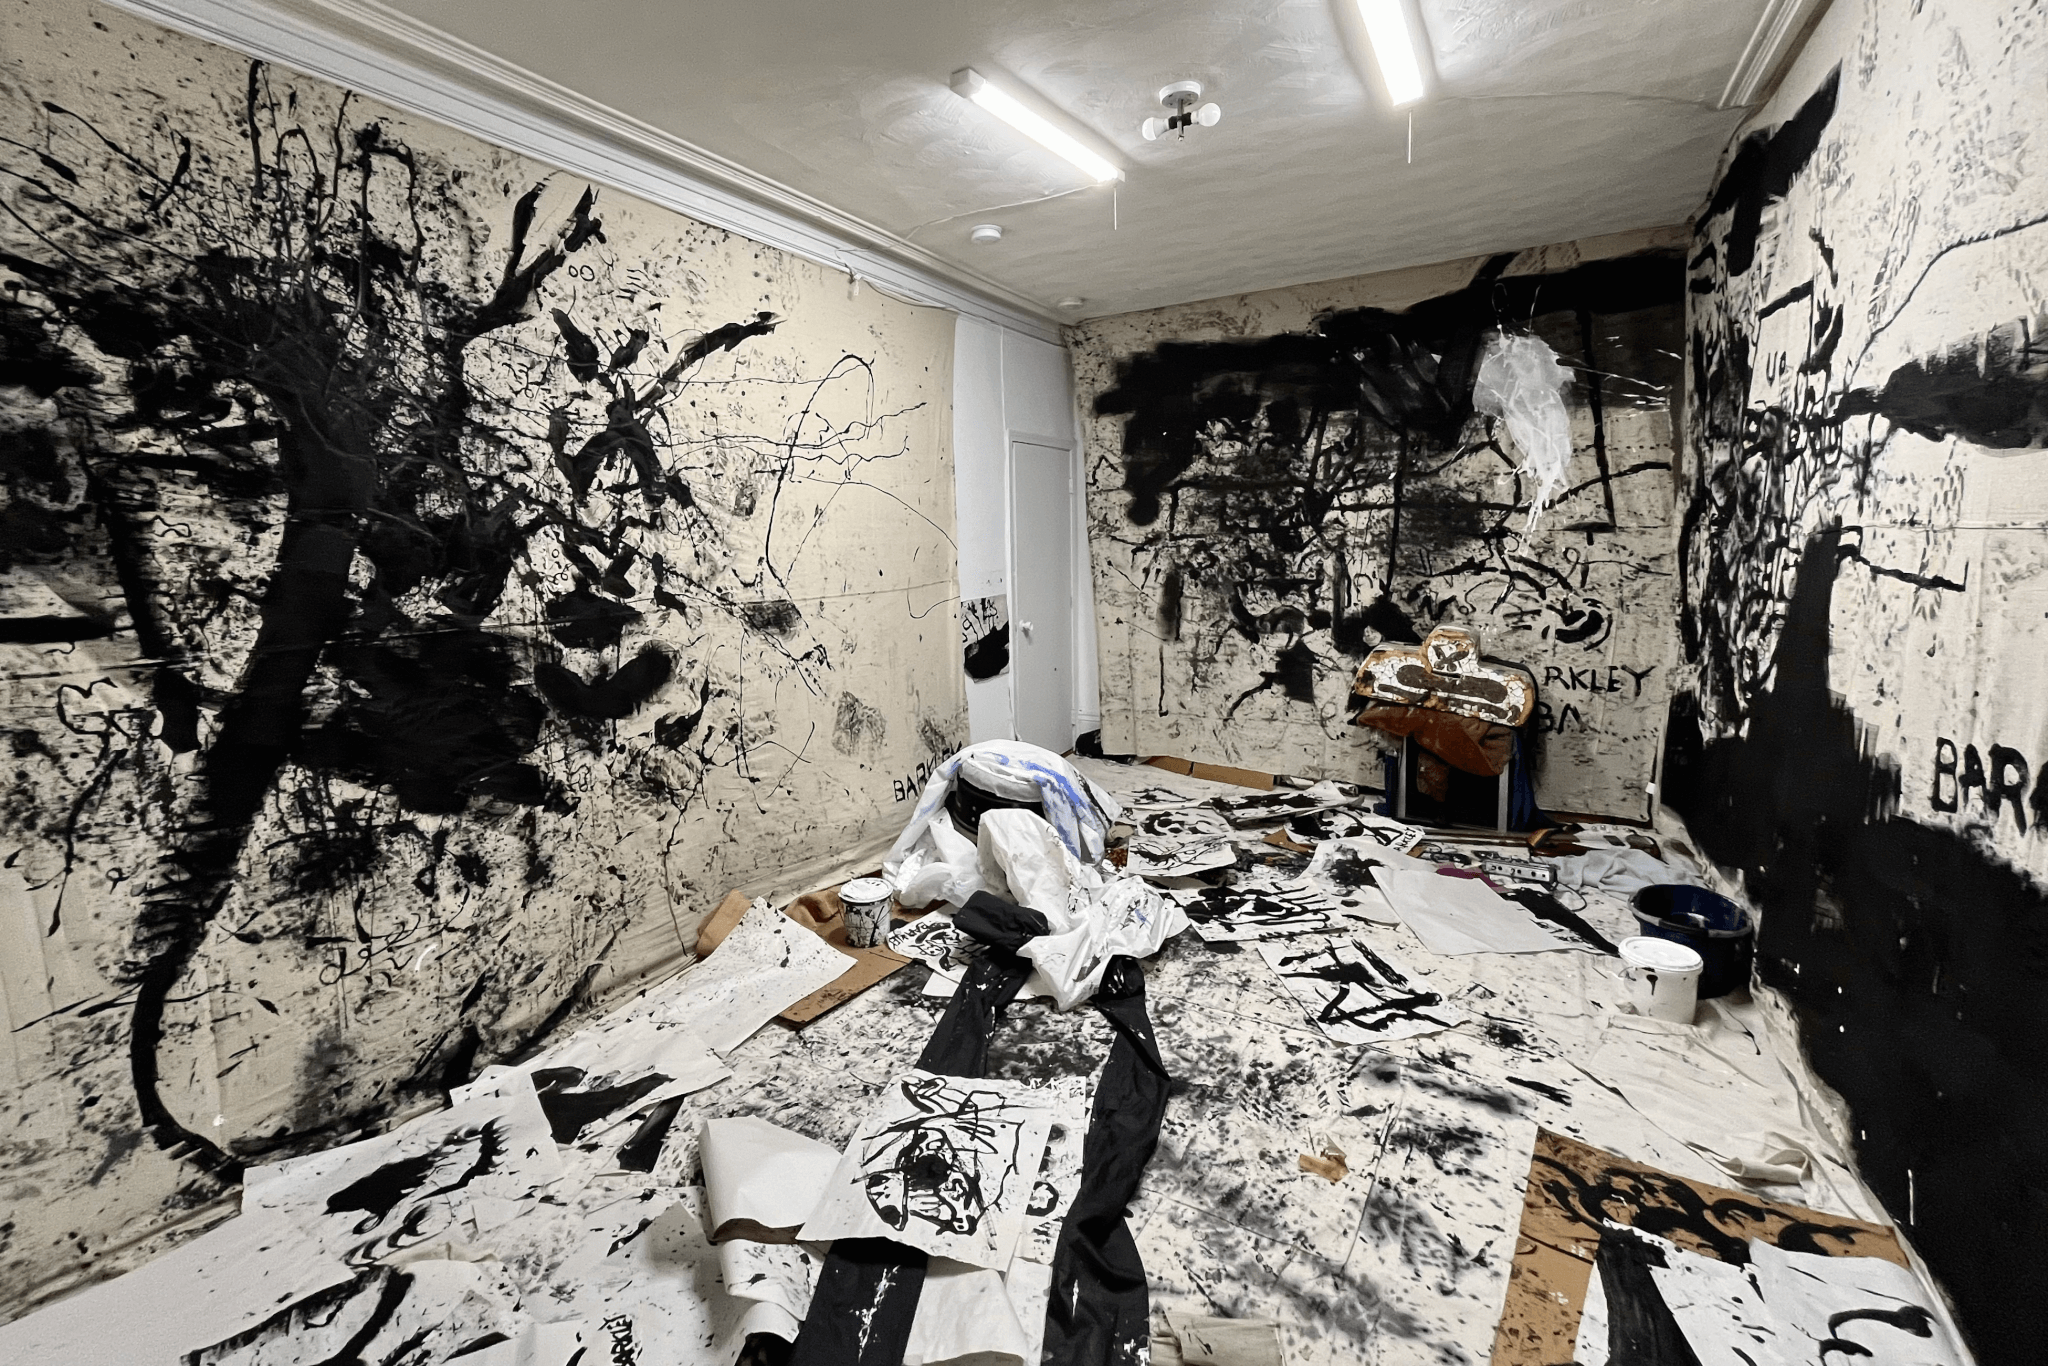 The walls and floors of a room are covered with splatters of black paint.